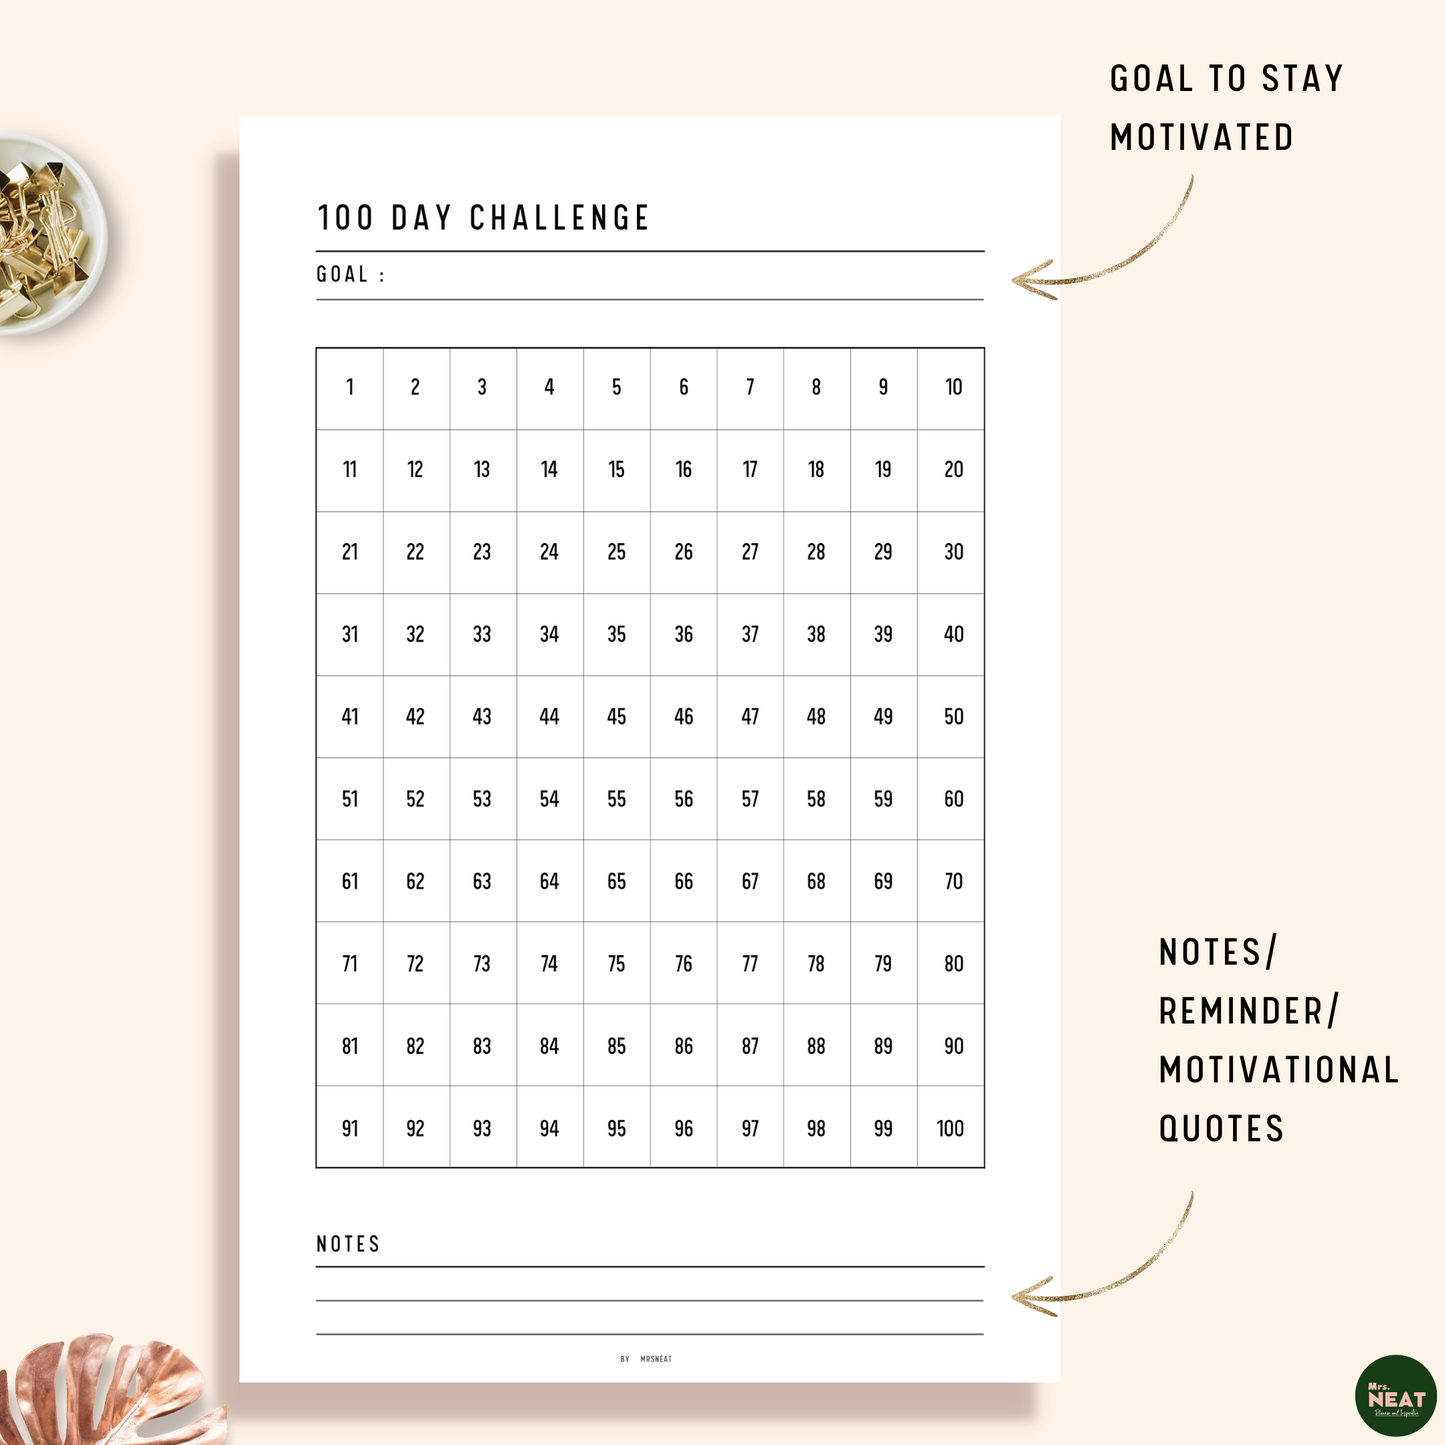 Minimalist 100 Day Challenge Habit Tracker Planner with Room for Goal and Notes